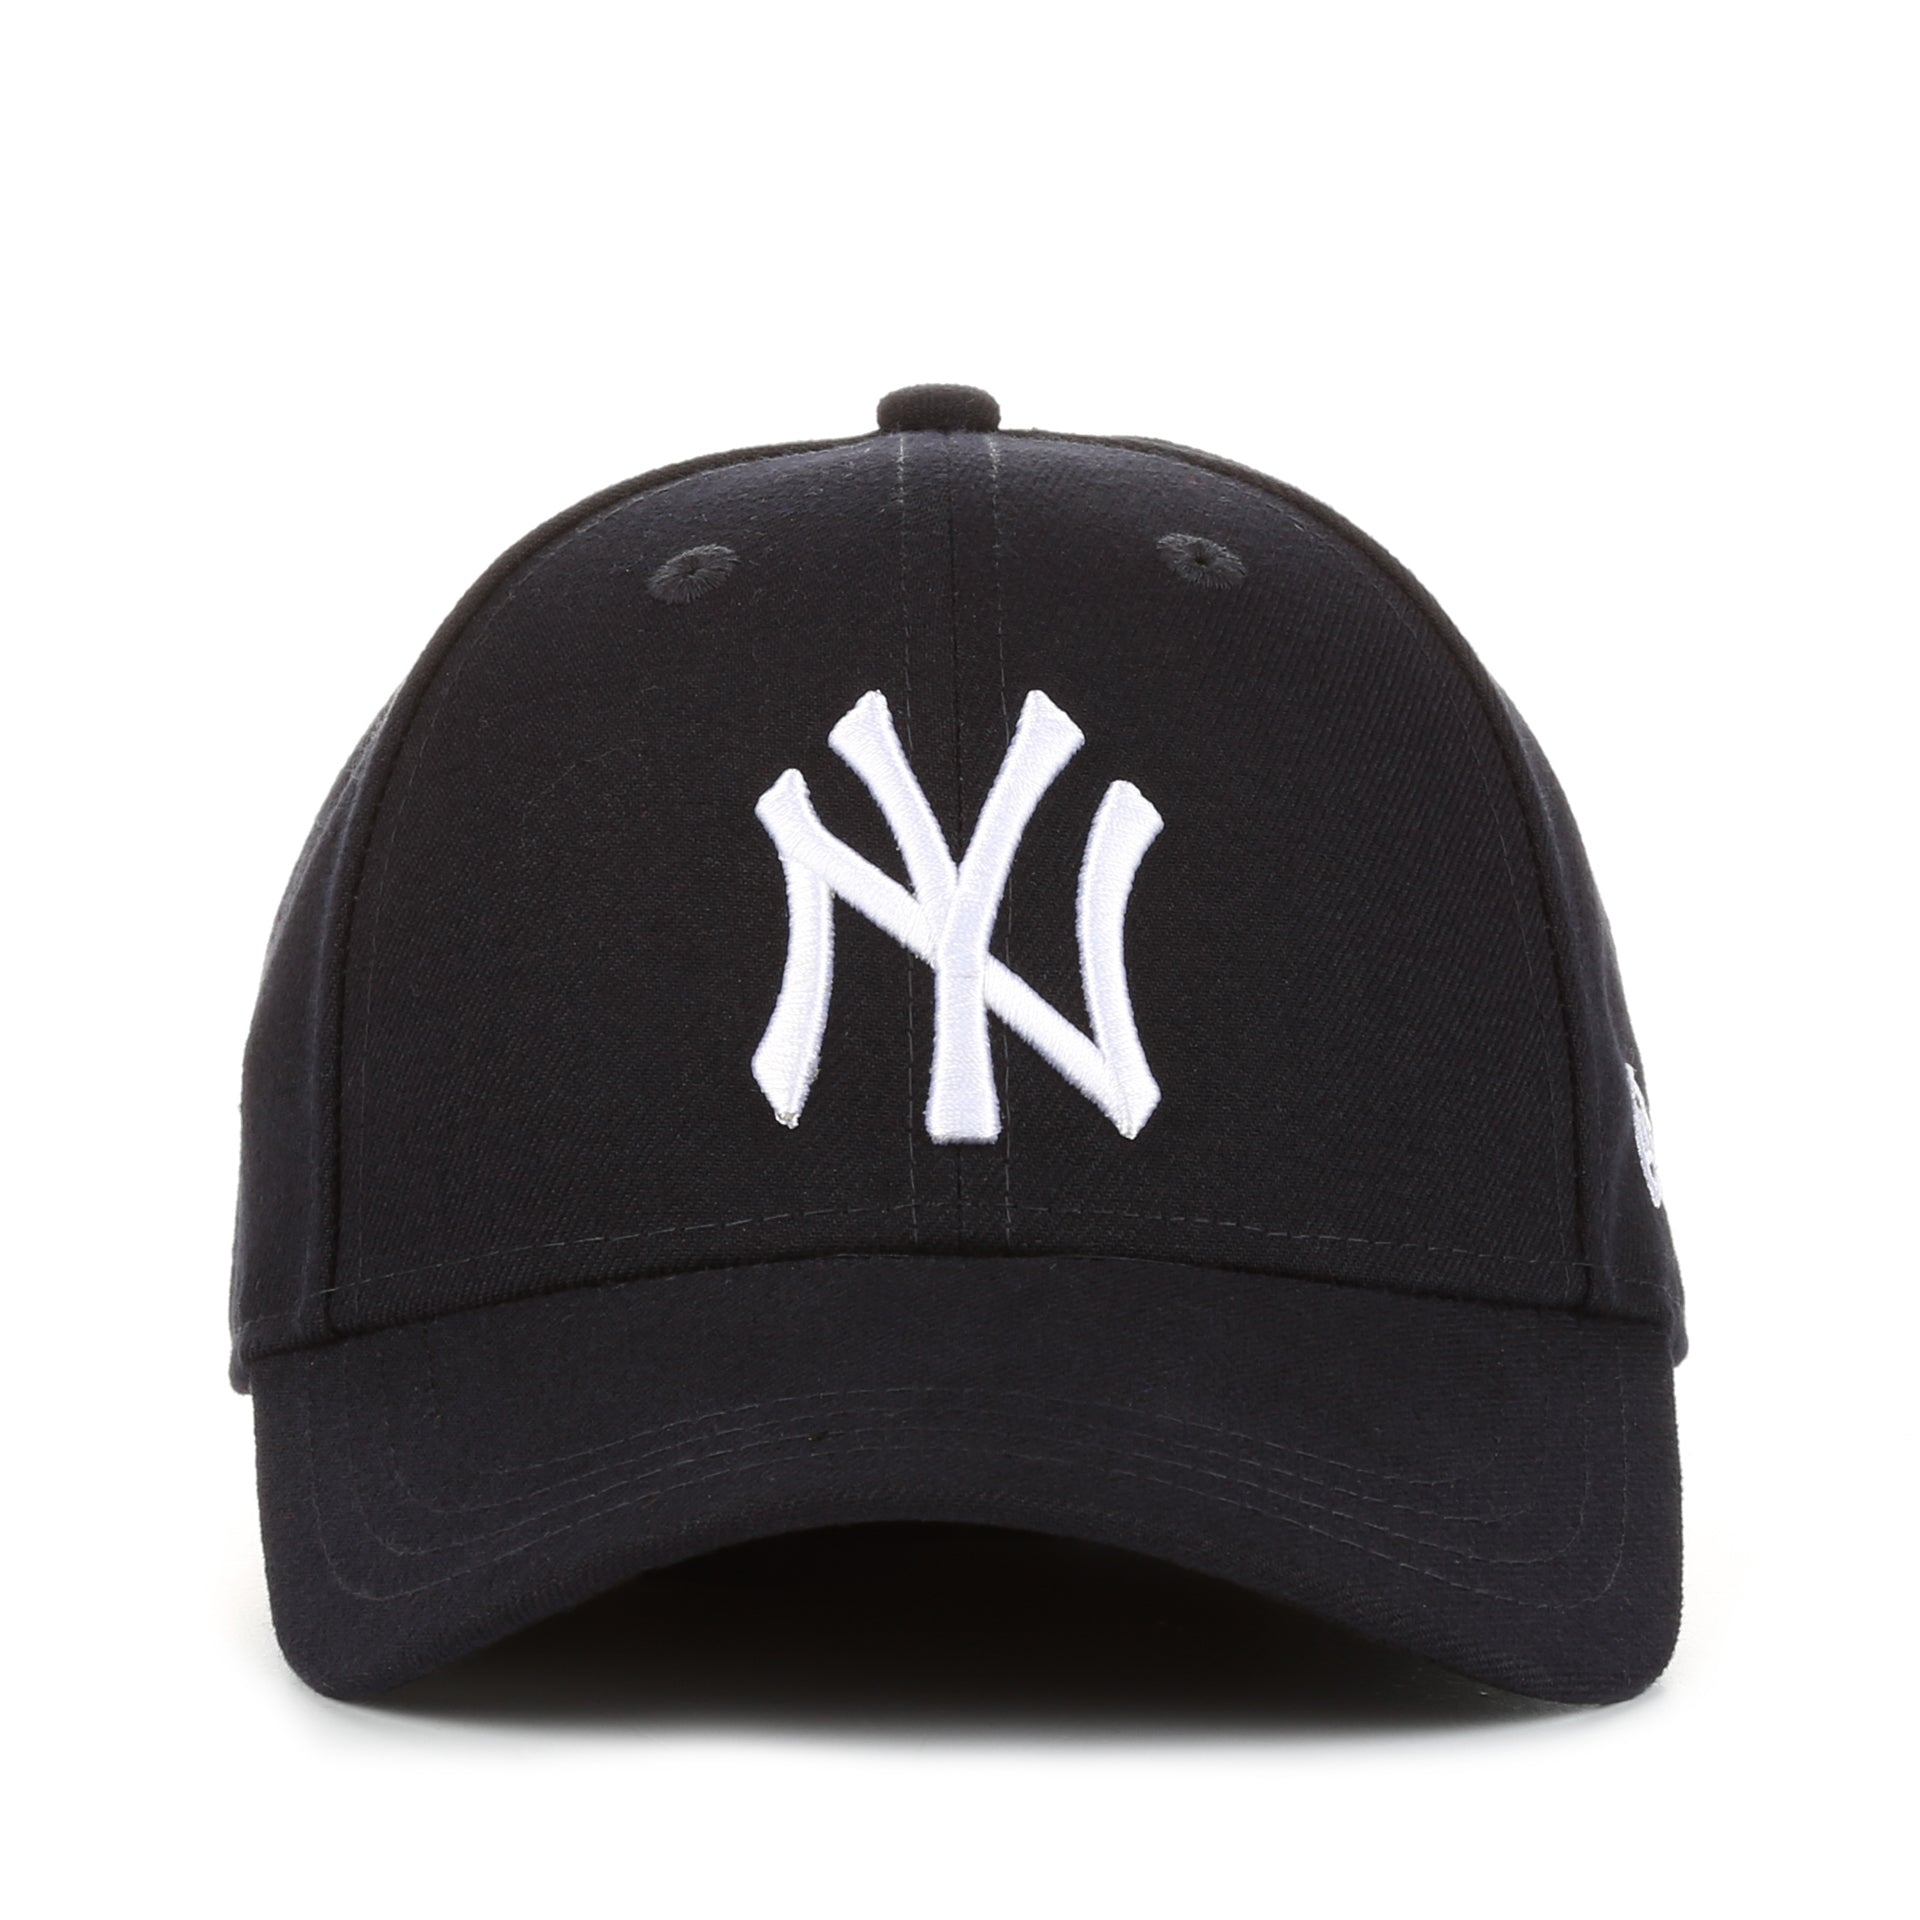 Risky boat Composer New Era 9Forty Junior The League Cap - New York Yankees/Navy - New Star